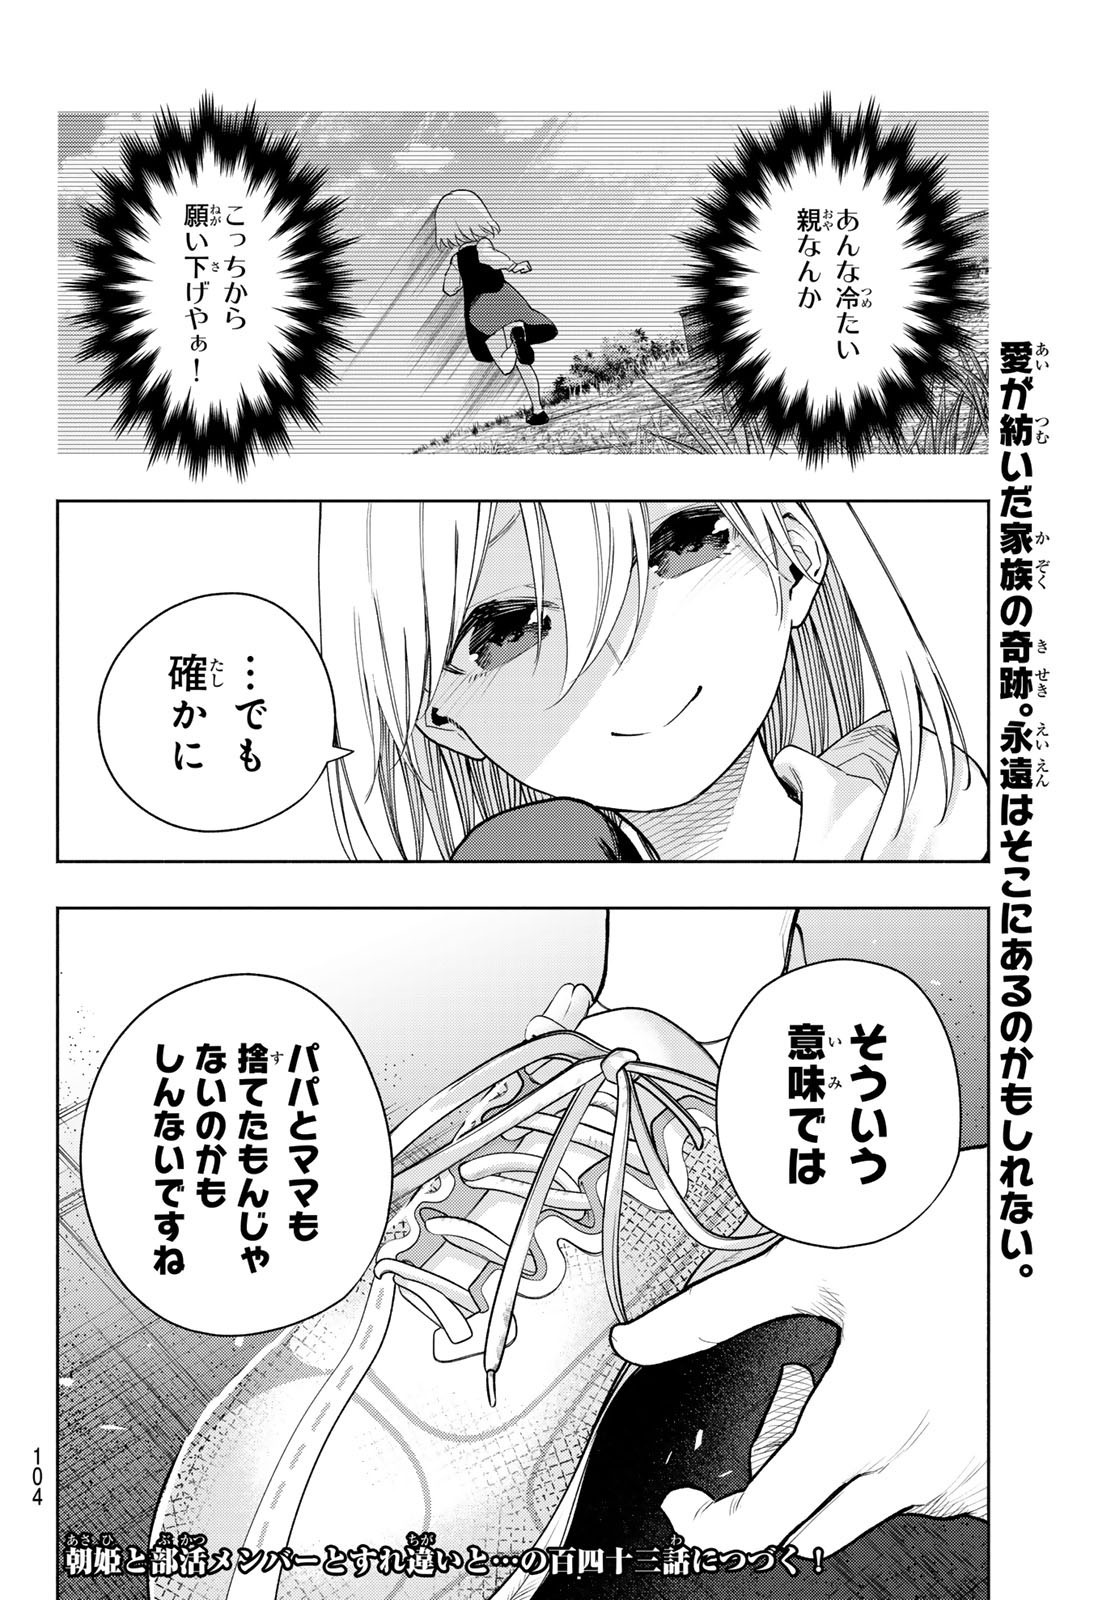 Weekly Shōnen Magazine - 週刊少年マガジン - Chapter 2024-30 - Page 101